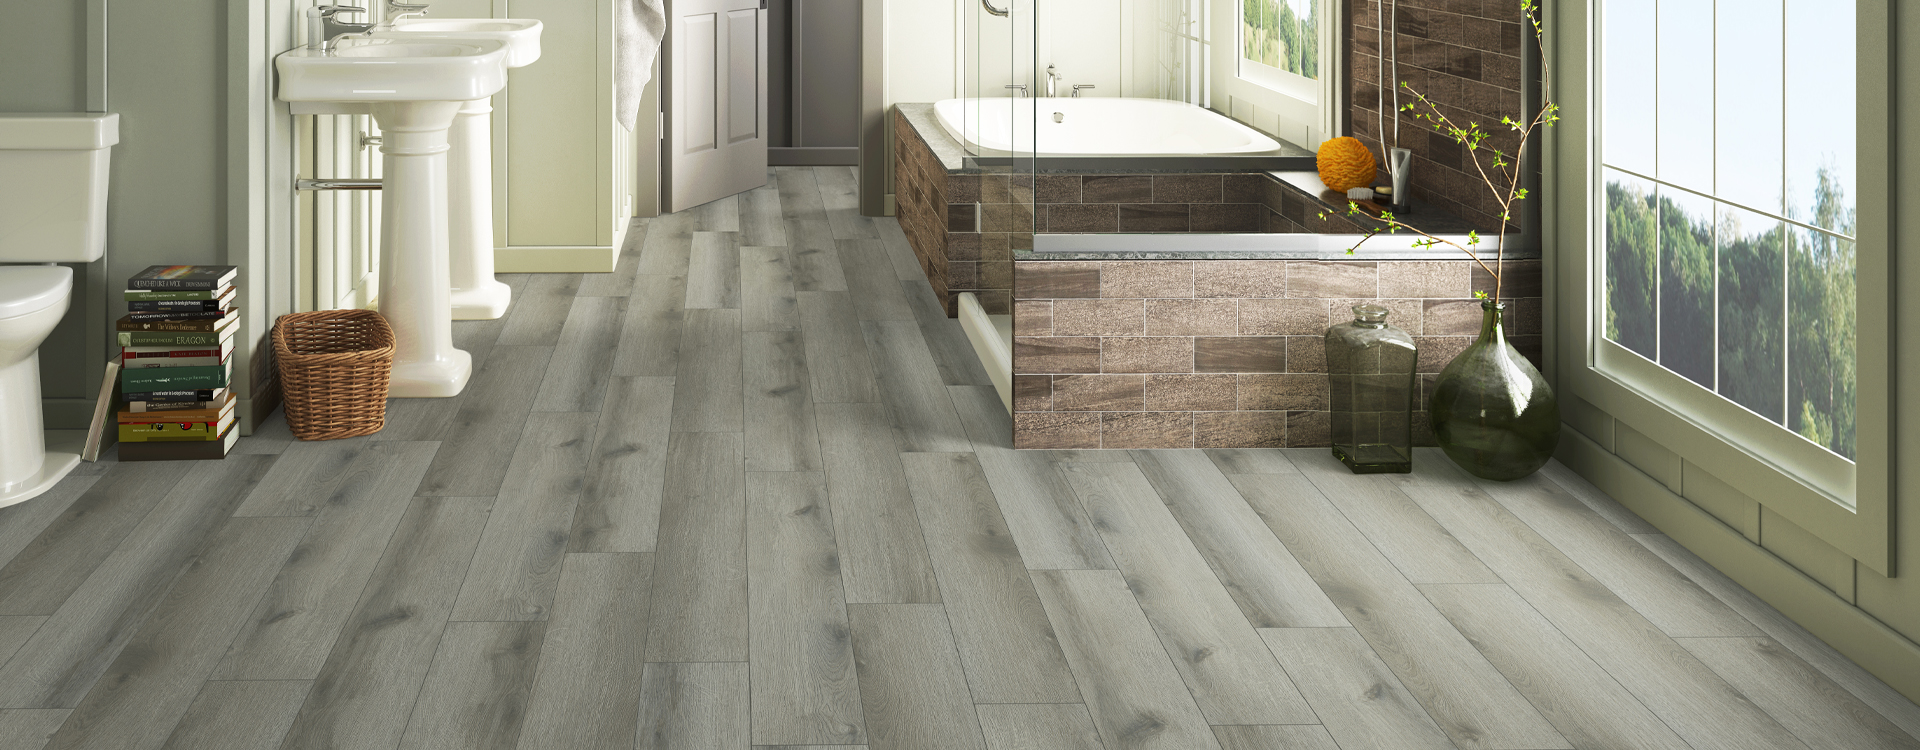 Horizen Flooring presents to you a picture of a quality wide plank Baileys Harbor luxury vinyl plank. NovoCore Q Merengue collection features a wide range of colors & designs that will compliment any interior. Natural wood grain synchronized surface allow for an authentic hardwood look & feel. This collection features a 0.3″ / 7.5 mm overall thickness and a durable 22 mil / 0.55 mm wear layer for residential and commercial applications.